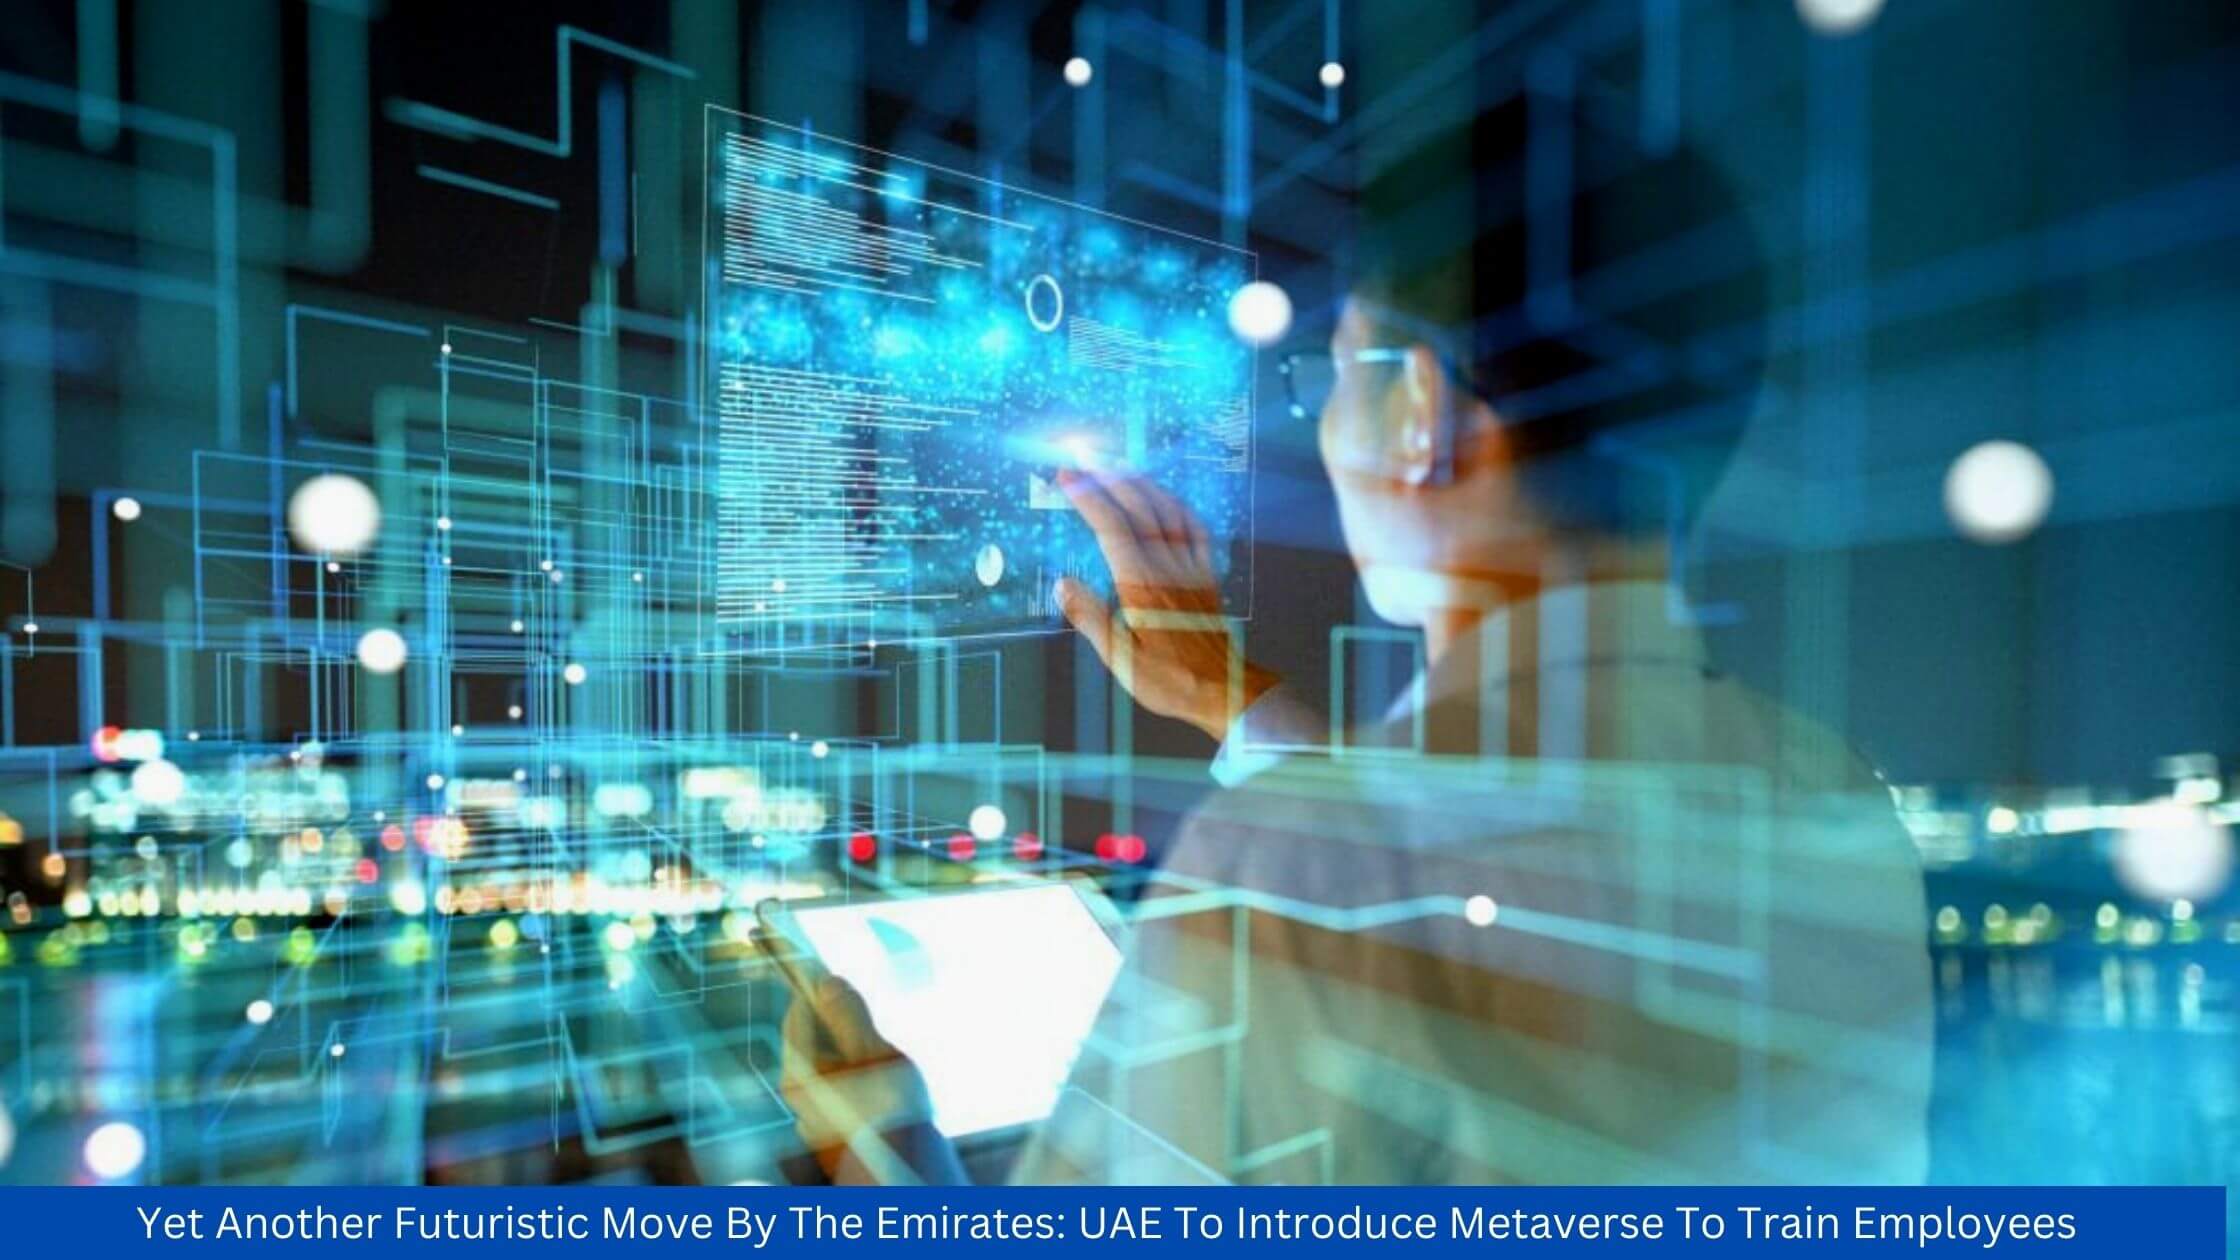 Yet Another Futuristic Move By The Emirates UAE To Introduce Metaverse To Train Employees